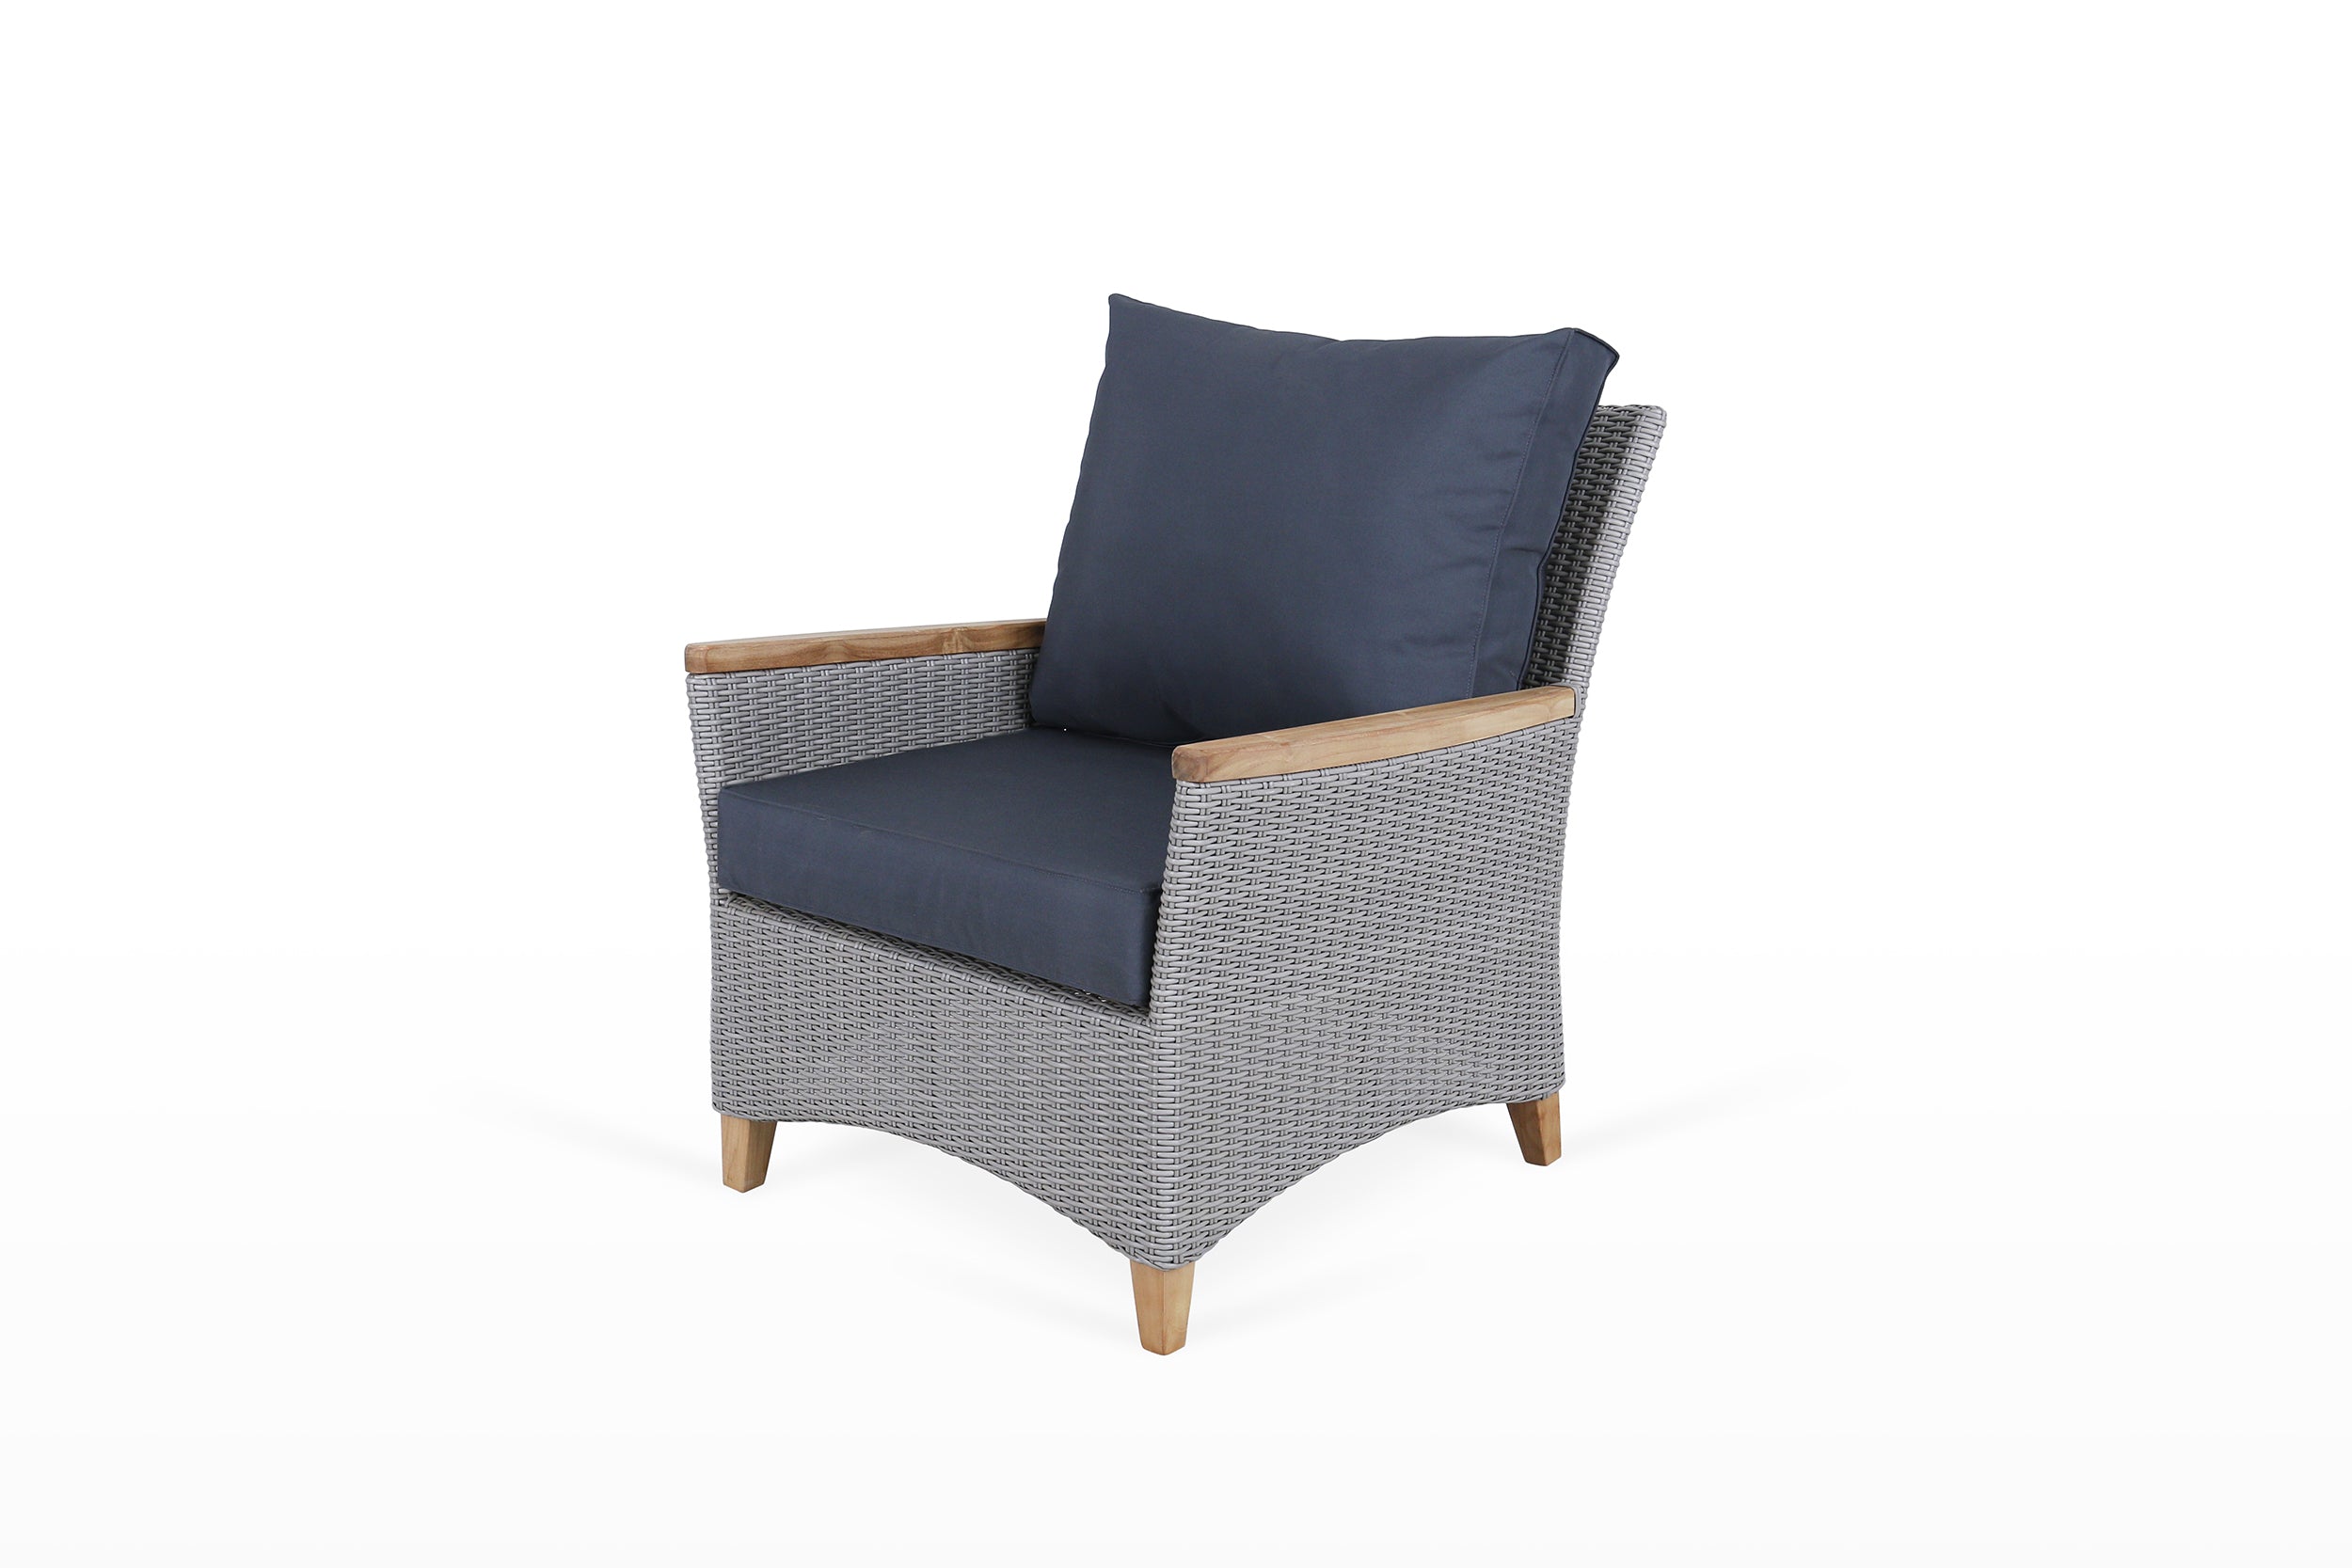 East India Florence Single Seat Lounger